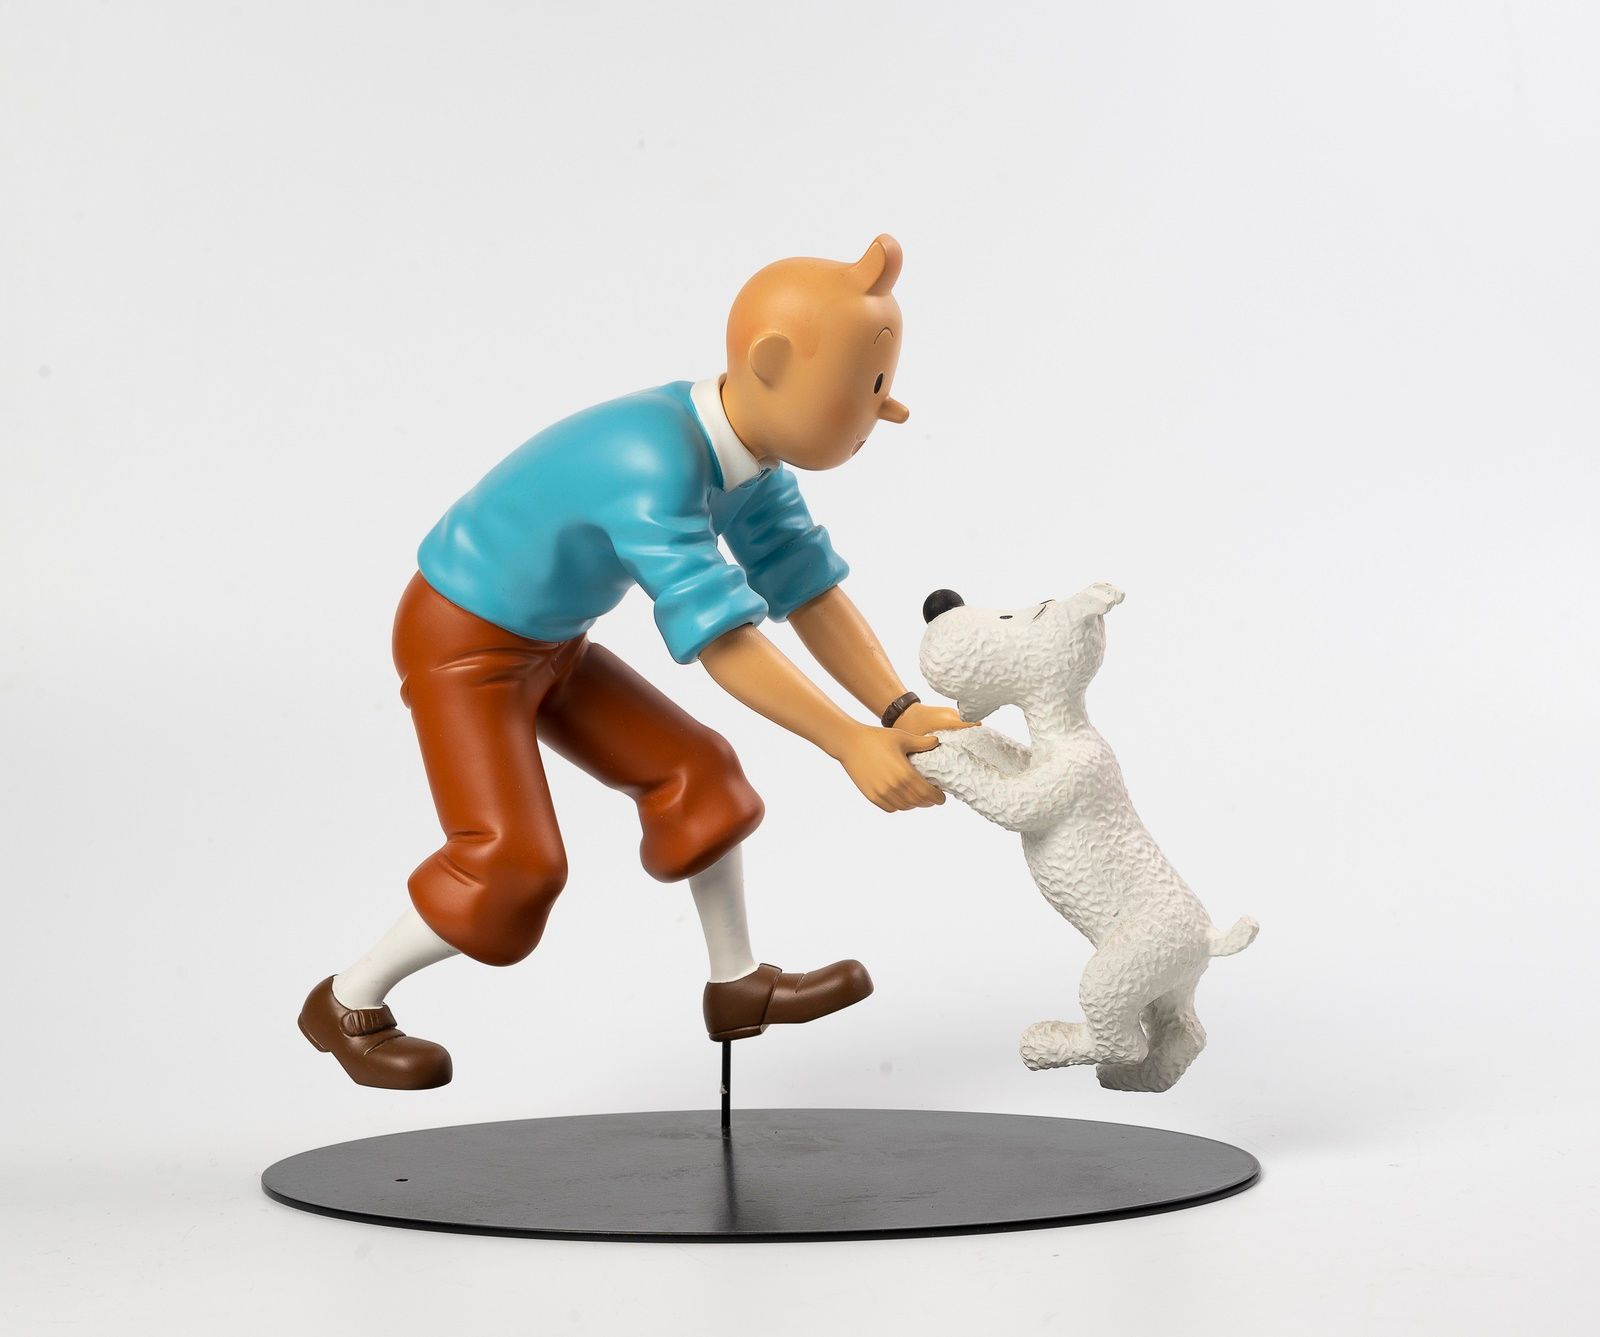 Null Tintin



HERGE / LEBLON DELIENNE / MOULINSART



Collection meetings 



T&hellip;